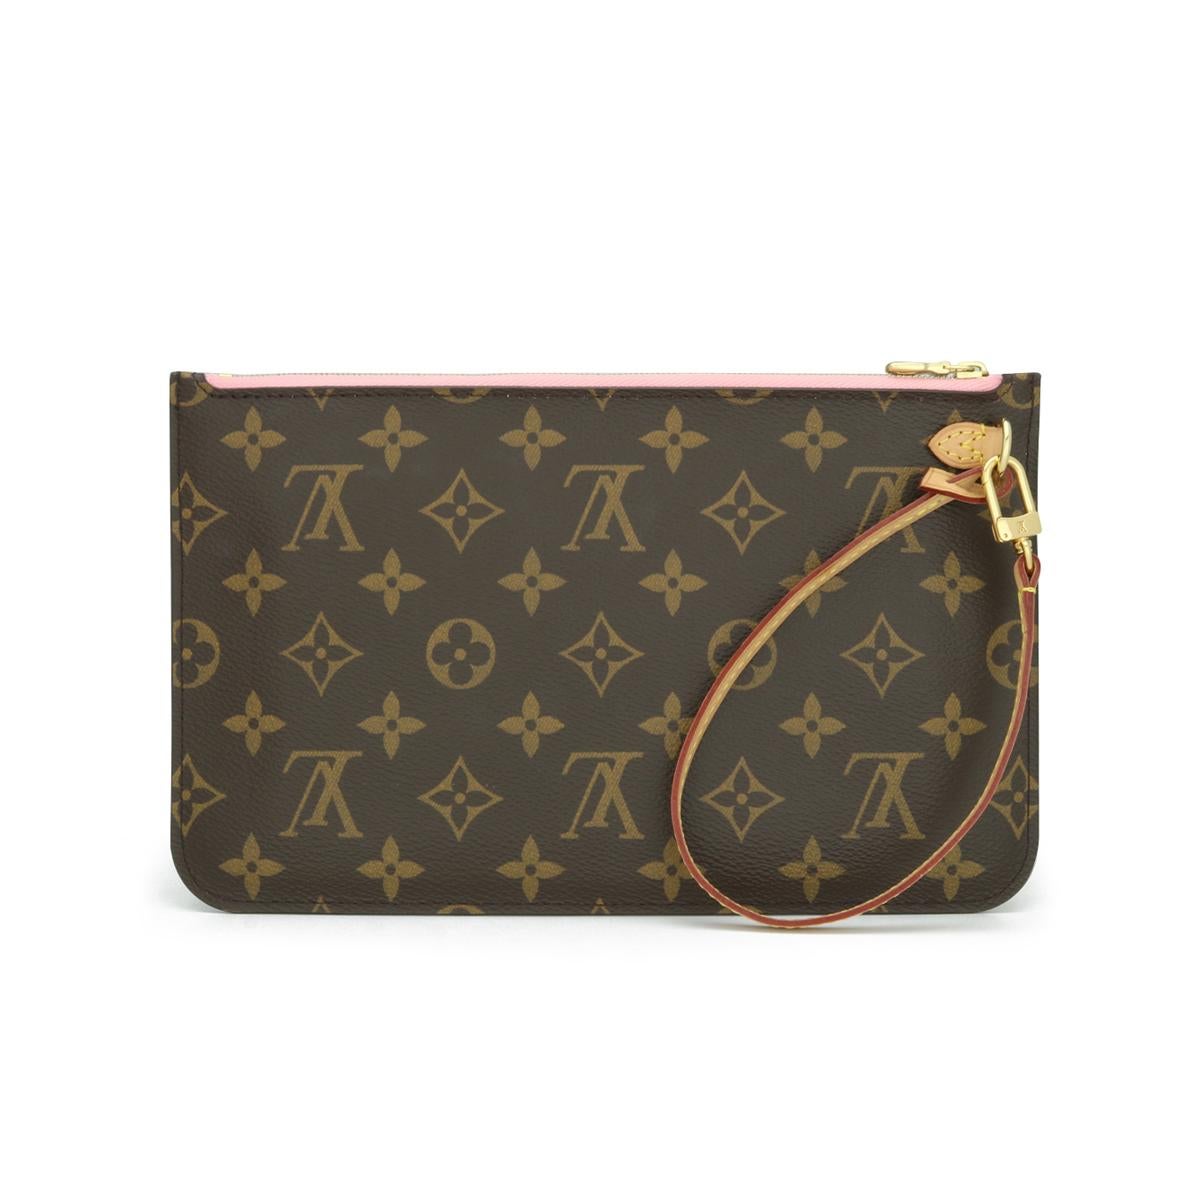 Louis Vuitton Neverfull MM Bag in Monogram Jungle Dots 2016 Limited Edition For Sale 14